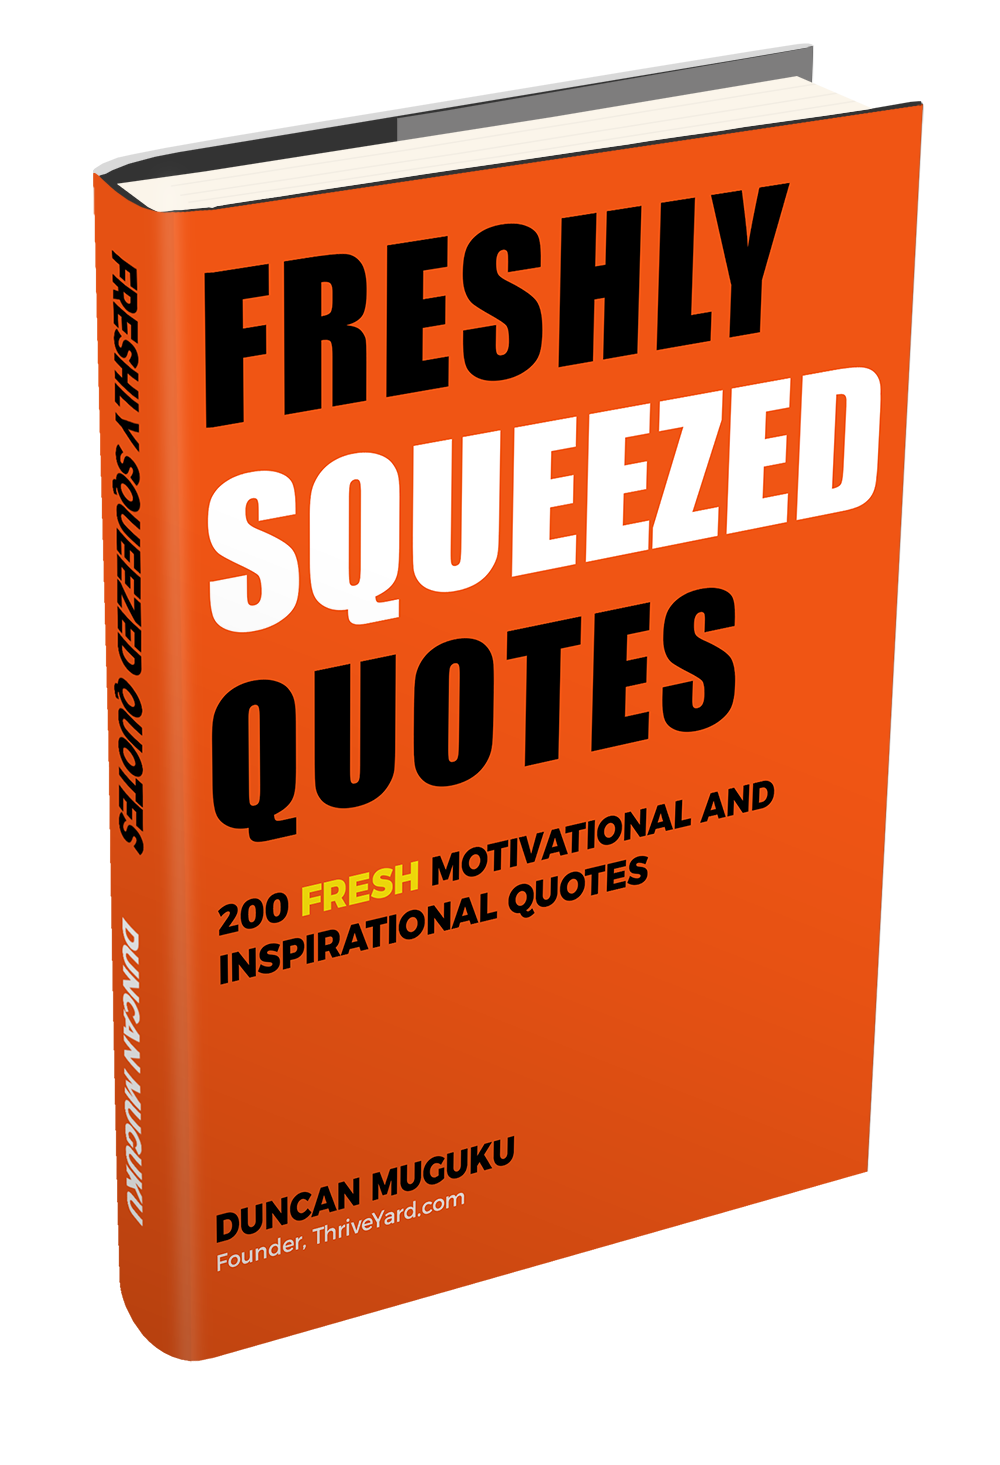 Freshly Squeezed Quotes: 200 Fresh Motivational and Inspirational Quotes (EBook) - By Duncan Muguku, Founder, ThriveYard.com